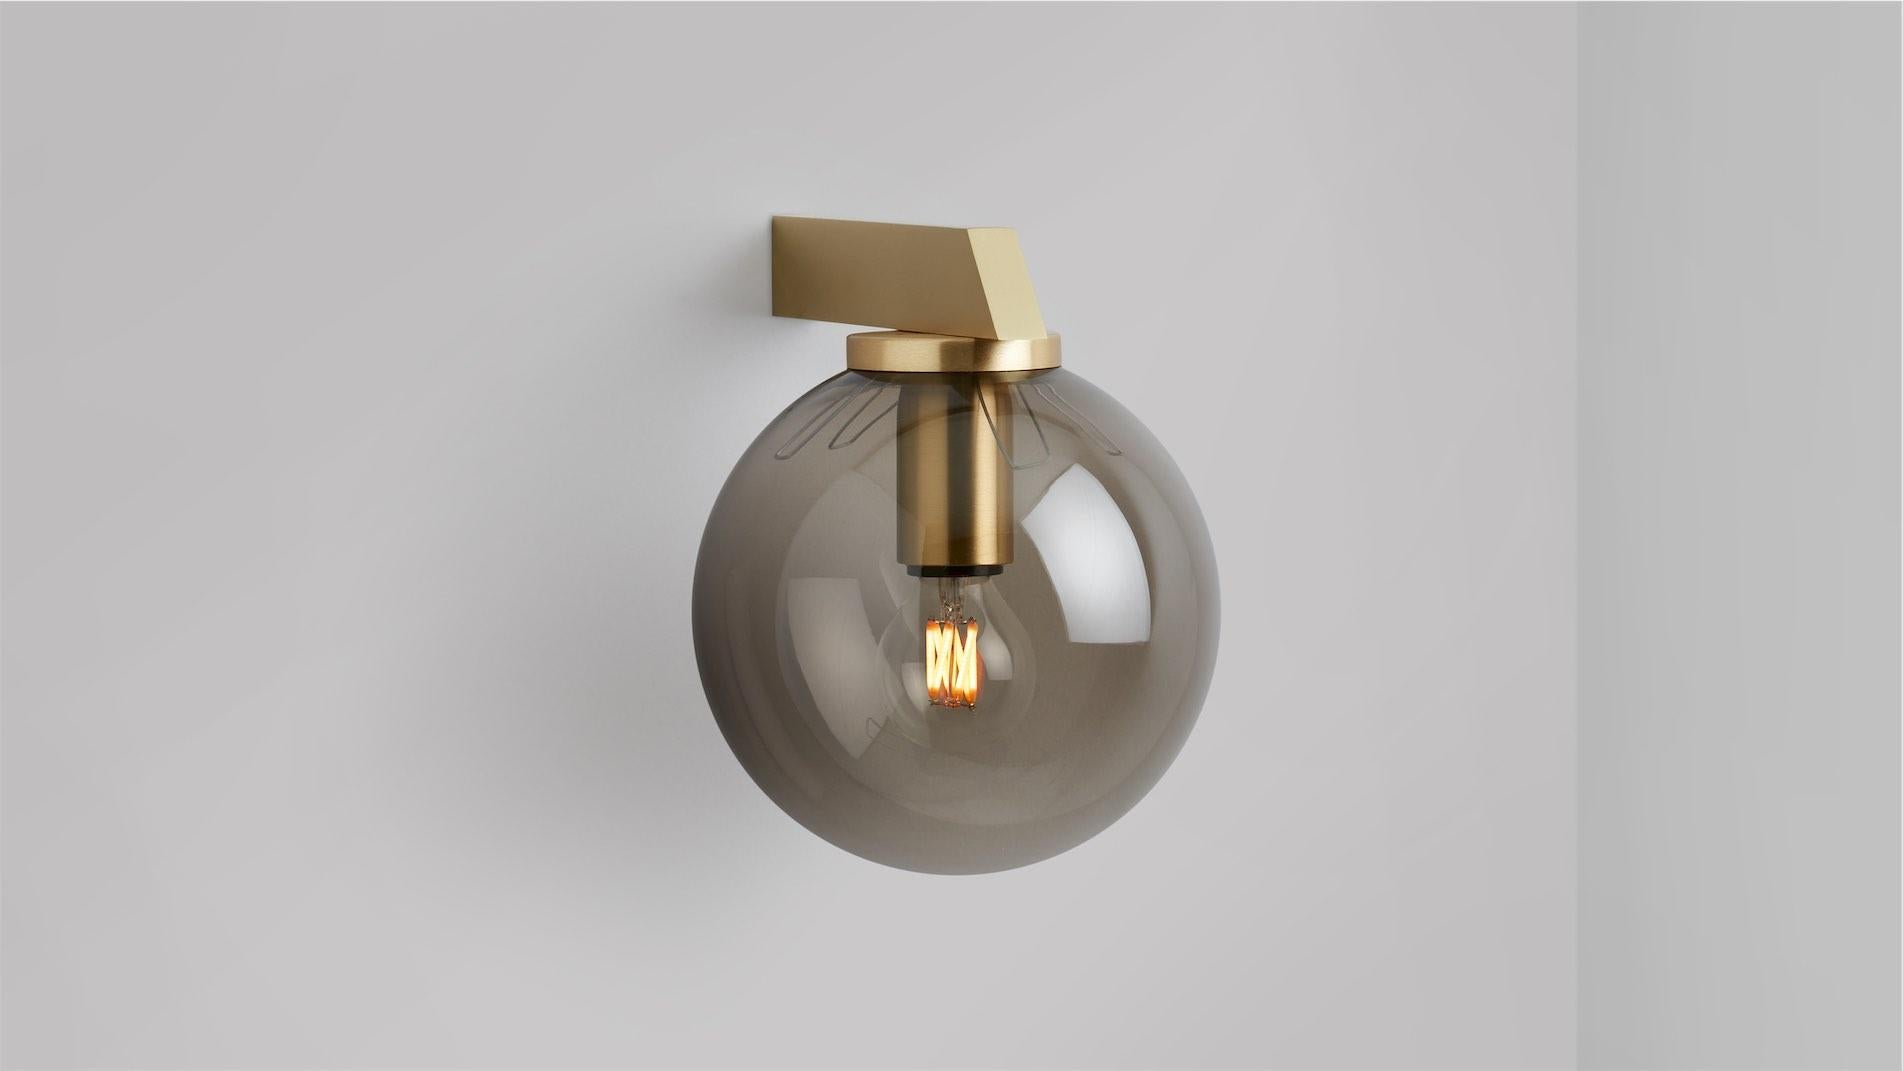 Gaia wall lamp by CTO Lighting
Materials: Satin brass with tinted glass.
Dimensions: D 21.4 x W 15 x H 19 cm
Available in bronze or satin brass and in hand shaped smoke glass, matte opal glass, shiny opal glass, or tinted glass.

An elegant linear